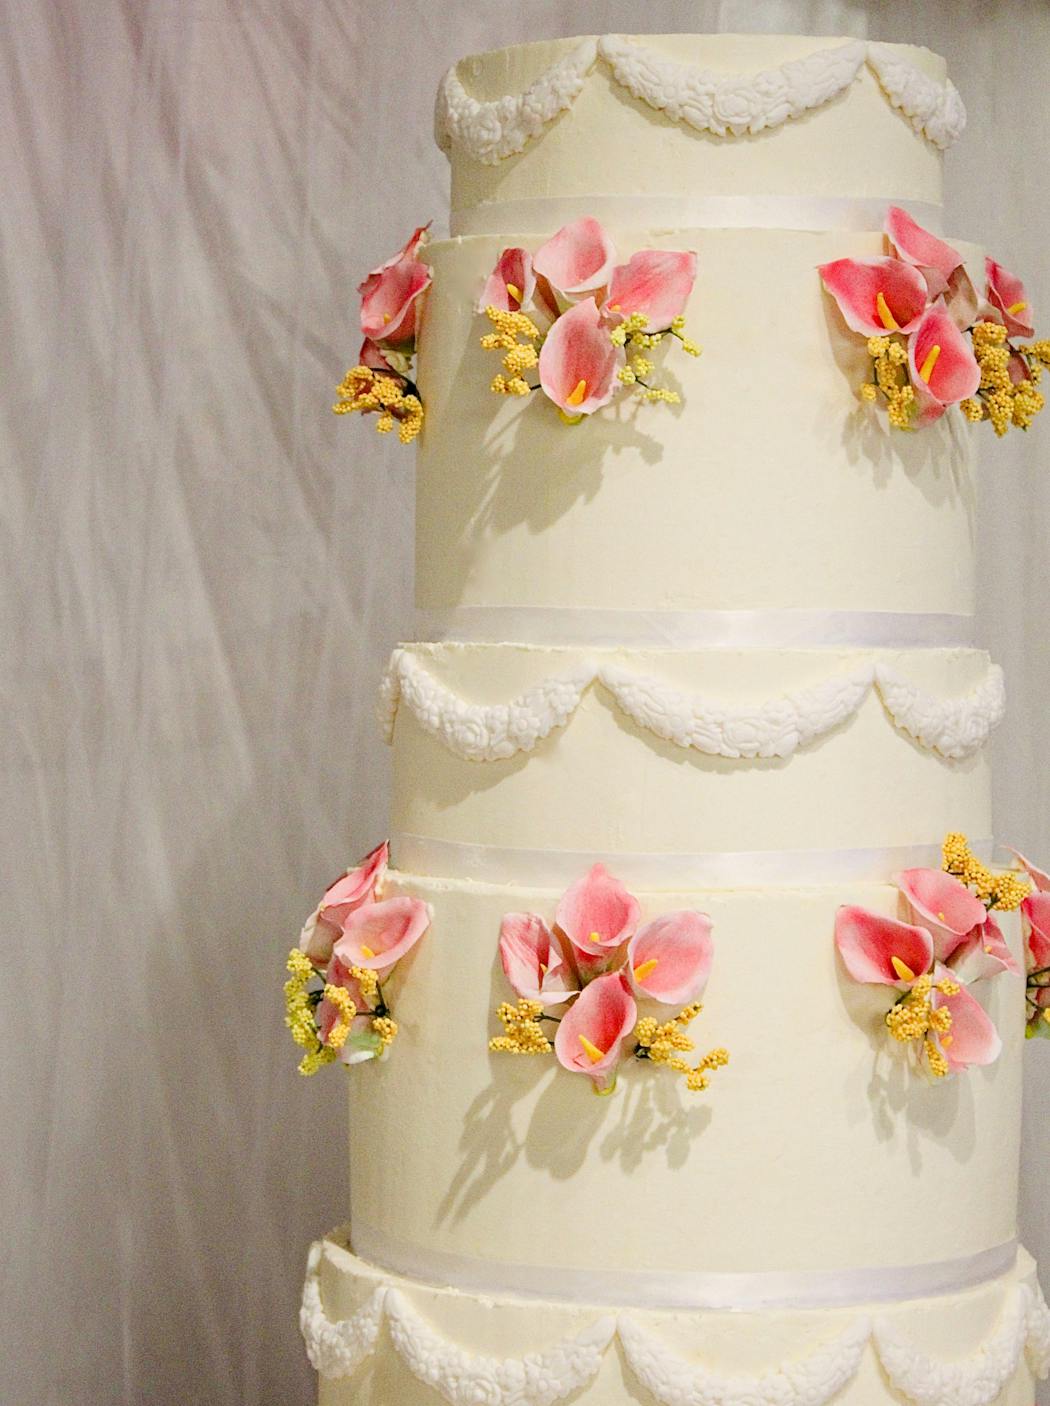 Jai Xiong creates a variety of cakes at her bakery, Amour Patisserie.